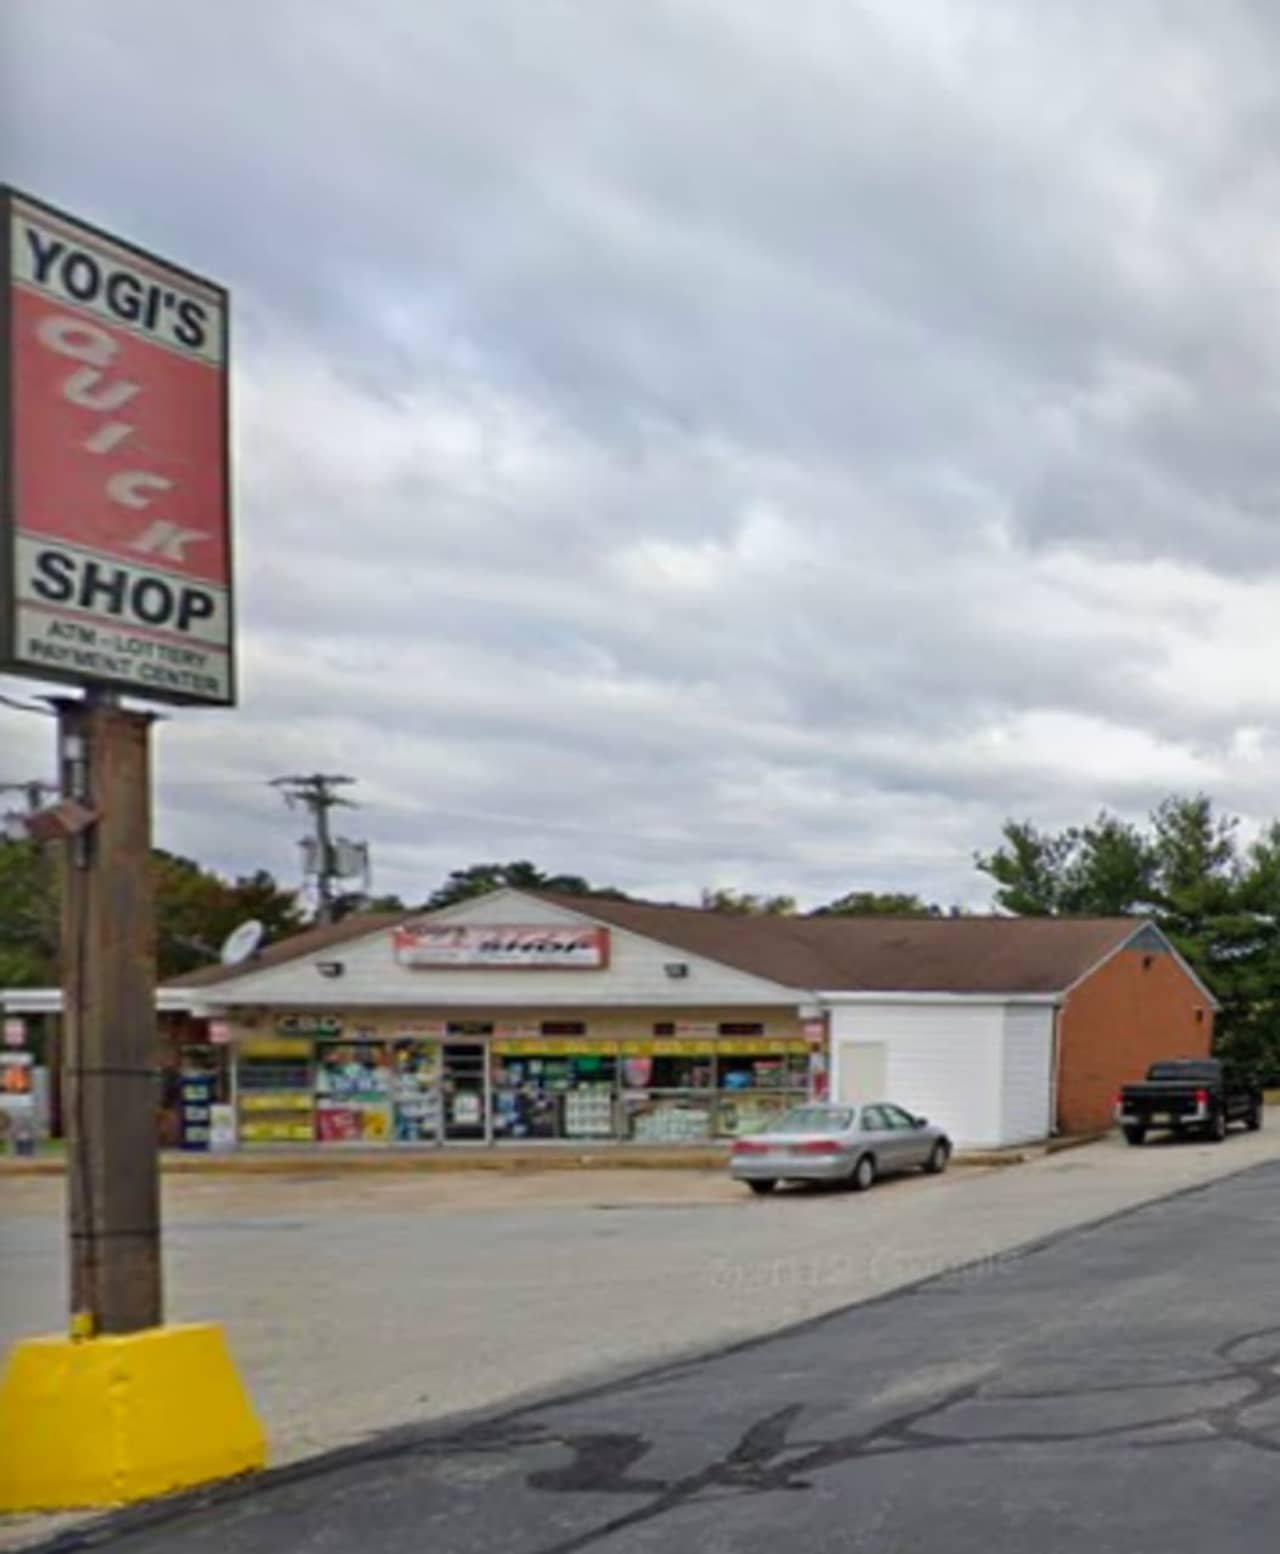 Yogi’s Quick Shop at 121 Greentree Road in Blackwood, Gloucester Township